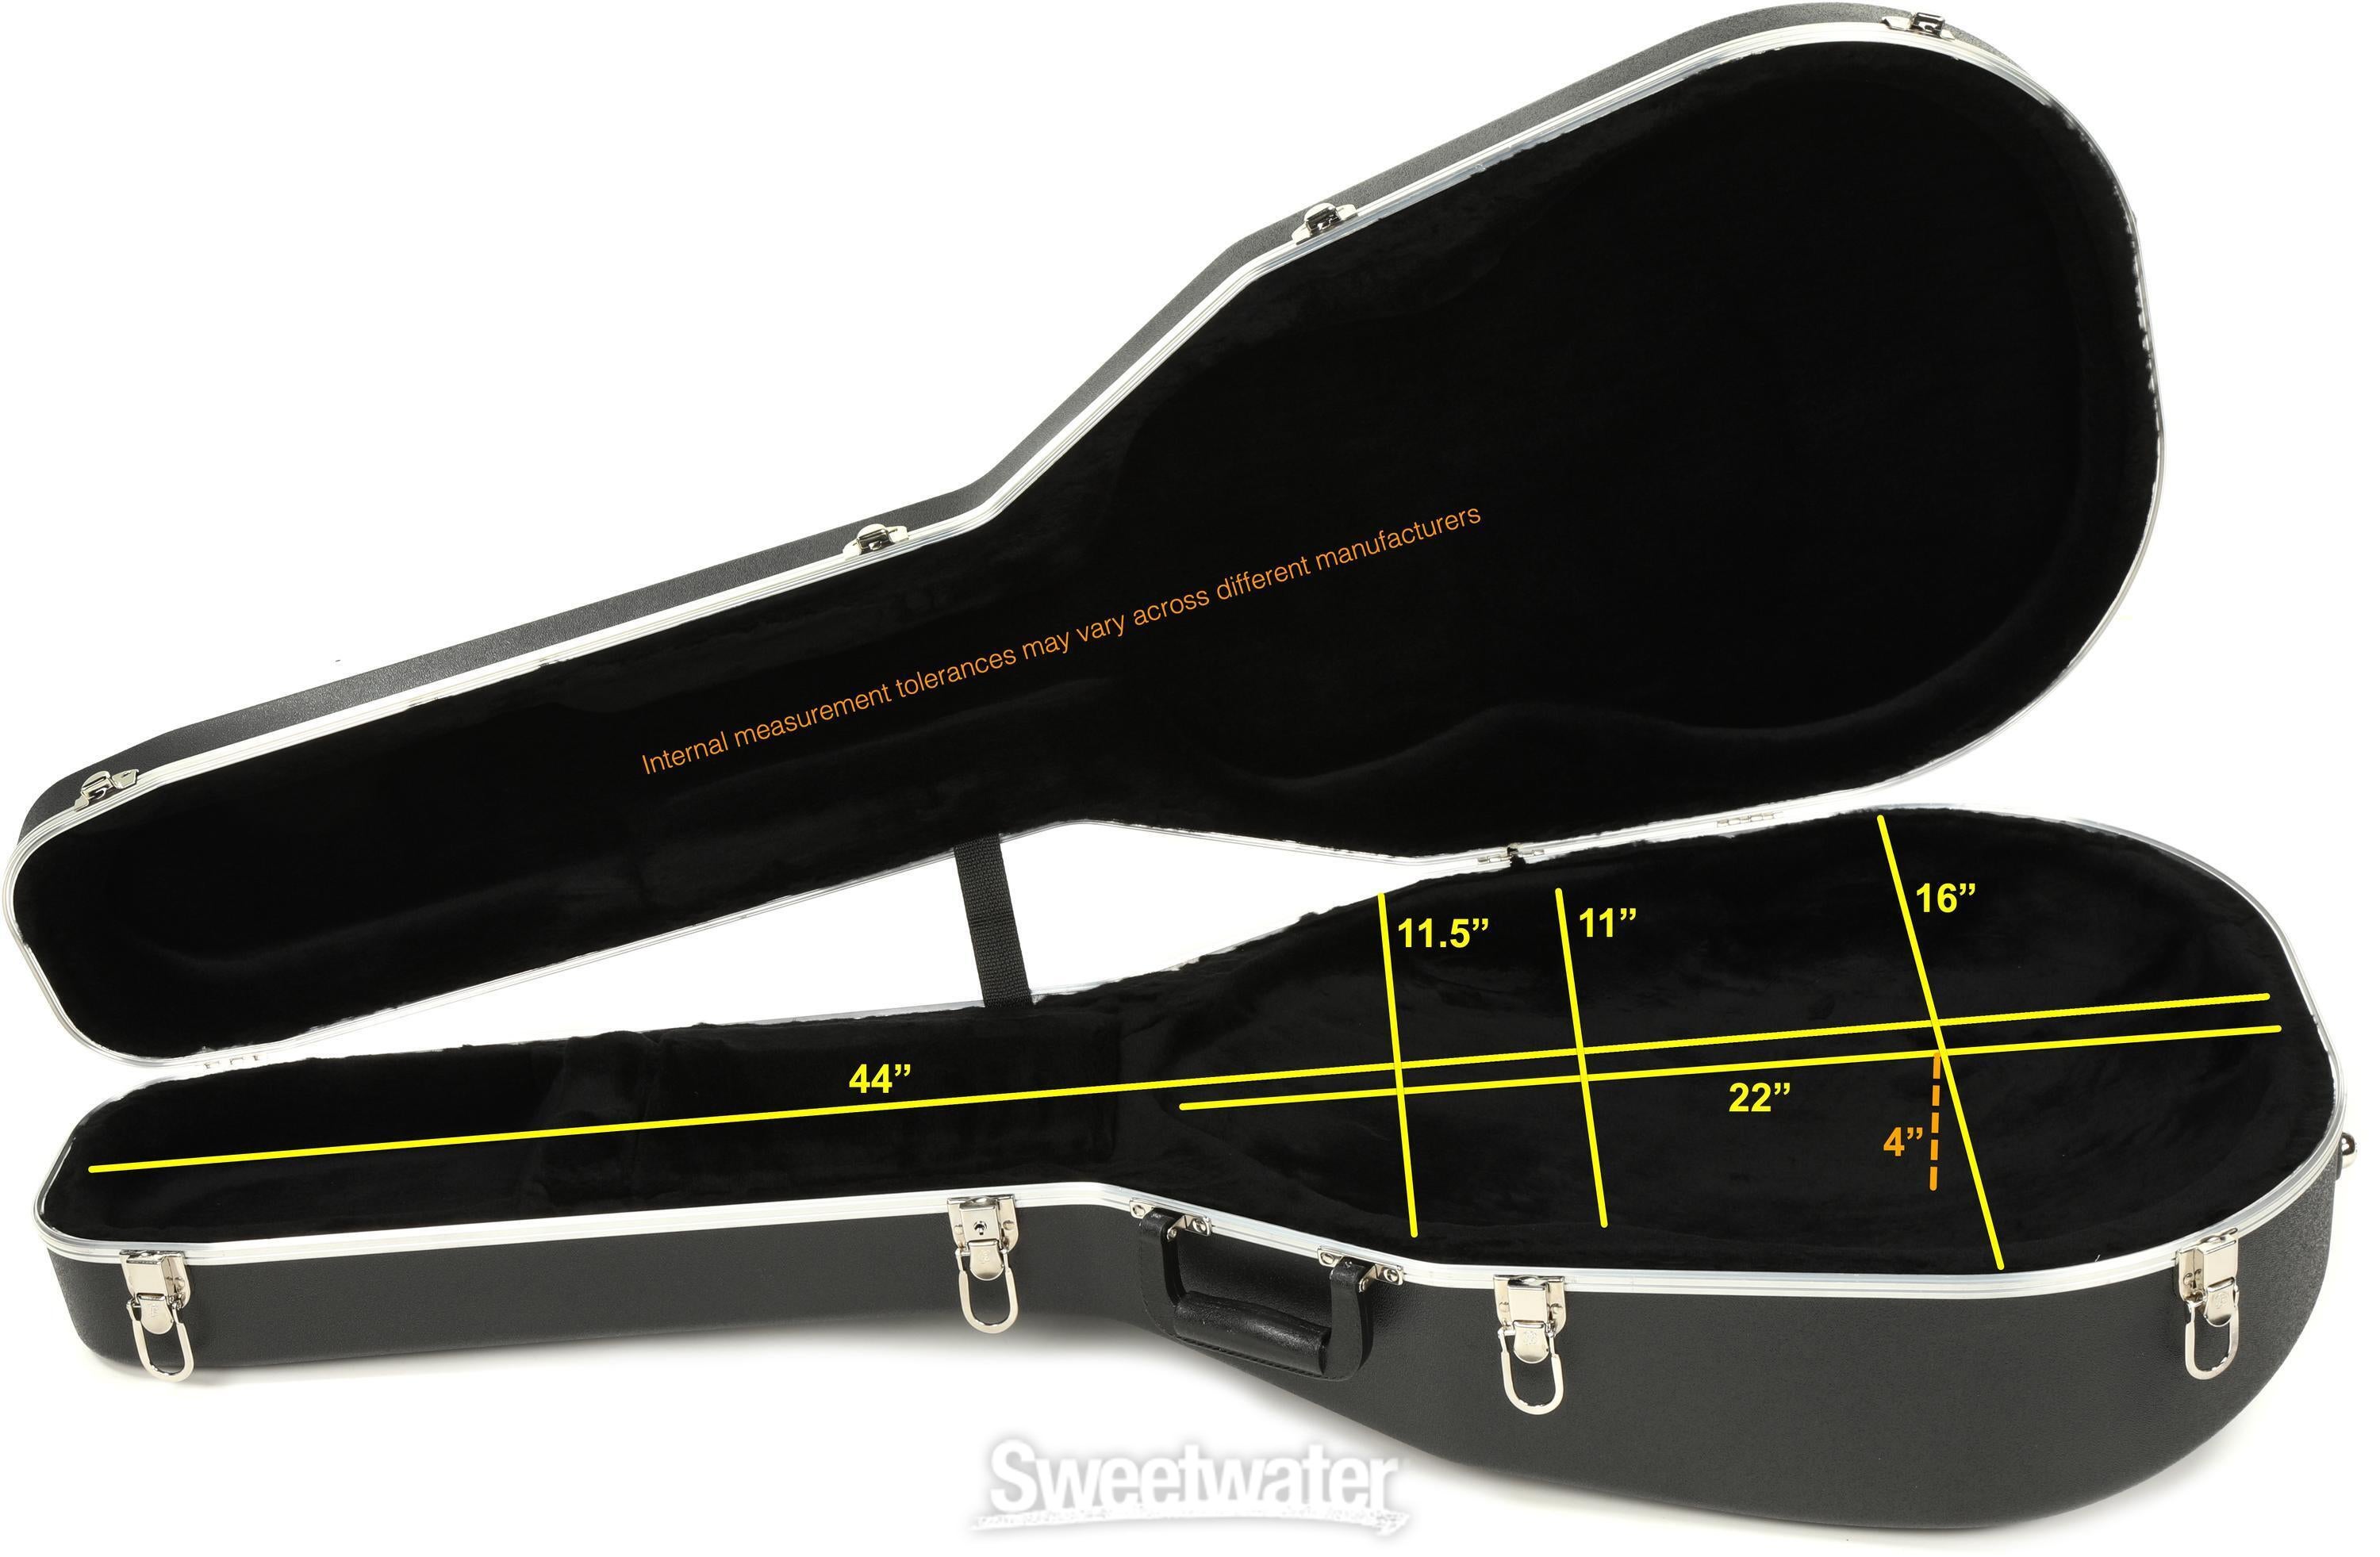 Ovation 8117K-0 Super Shallow ABS Hardshell Case Reviews | Sweetwater